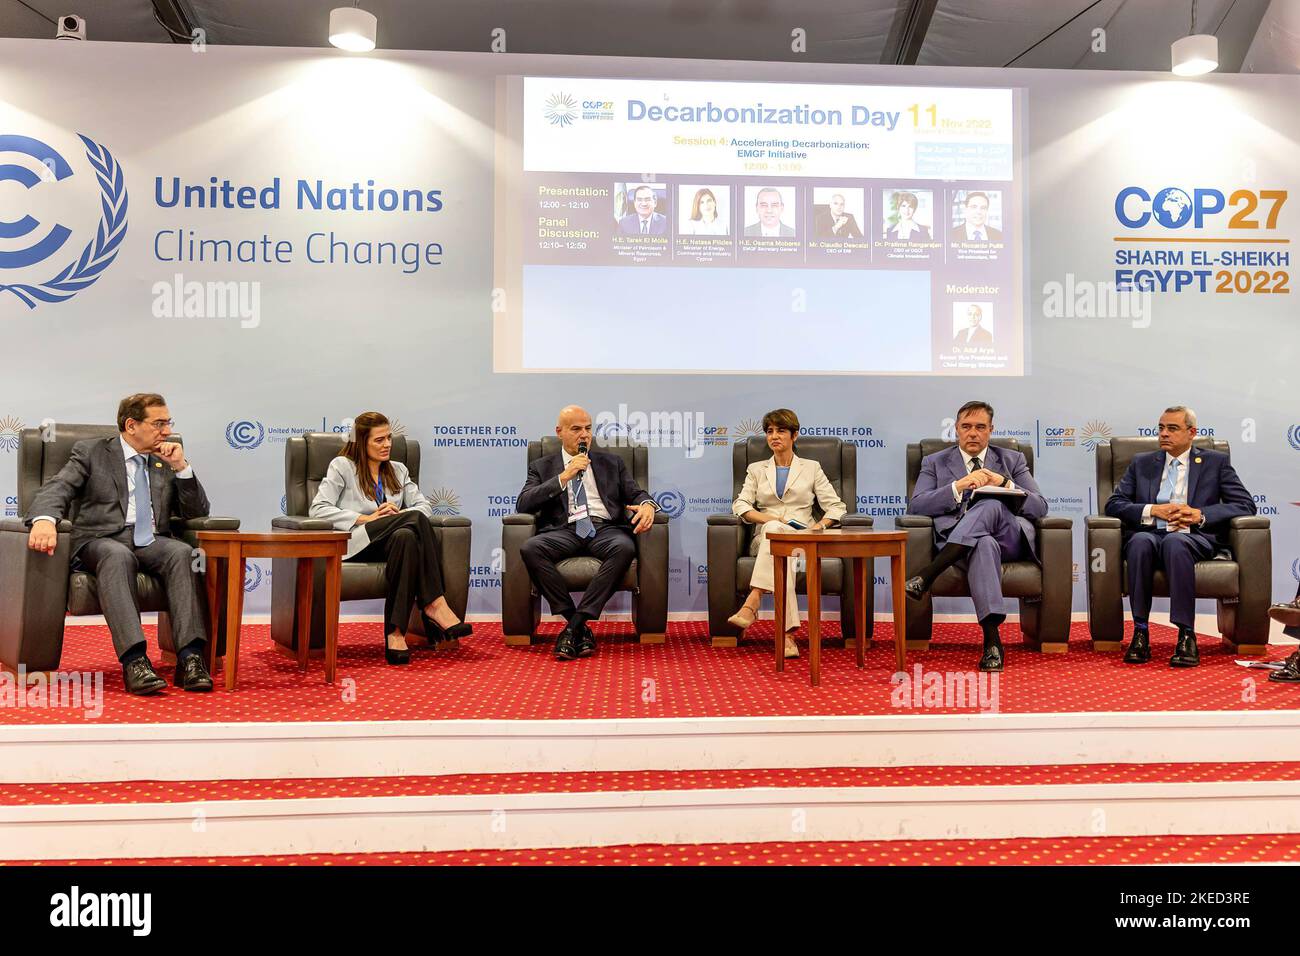 (From R-L) Terek al Molla - Minister of Petroleum and Mineral Resources of Egypt, Natasa Pilides - Minister of Energy, Commerce and Industry of Cyprus, Mario Descalzi - CEO of ENI, Pratima Rangarajan - CEO of OGCI Climate Investments, Ricardo Pulliti - Vice-President of Infrastructure of World Bank, and Osama Mobarez - EMGF Secretary General meet on discussion panel on the fifth day of the COP27 UN Climate Change Conference, held by UNFCCC in Sharm El-Sheikh International Convention Center. COP27 is running from November 6 to November 18 in Sharm El Sheikh and focuses on the implementation of Stock Photo